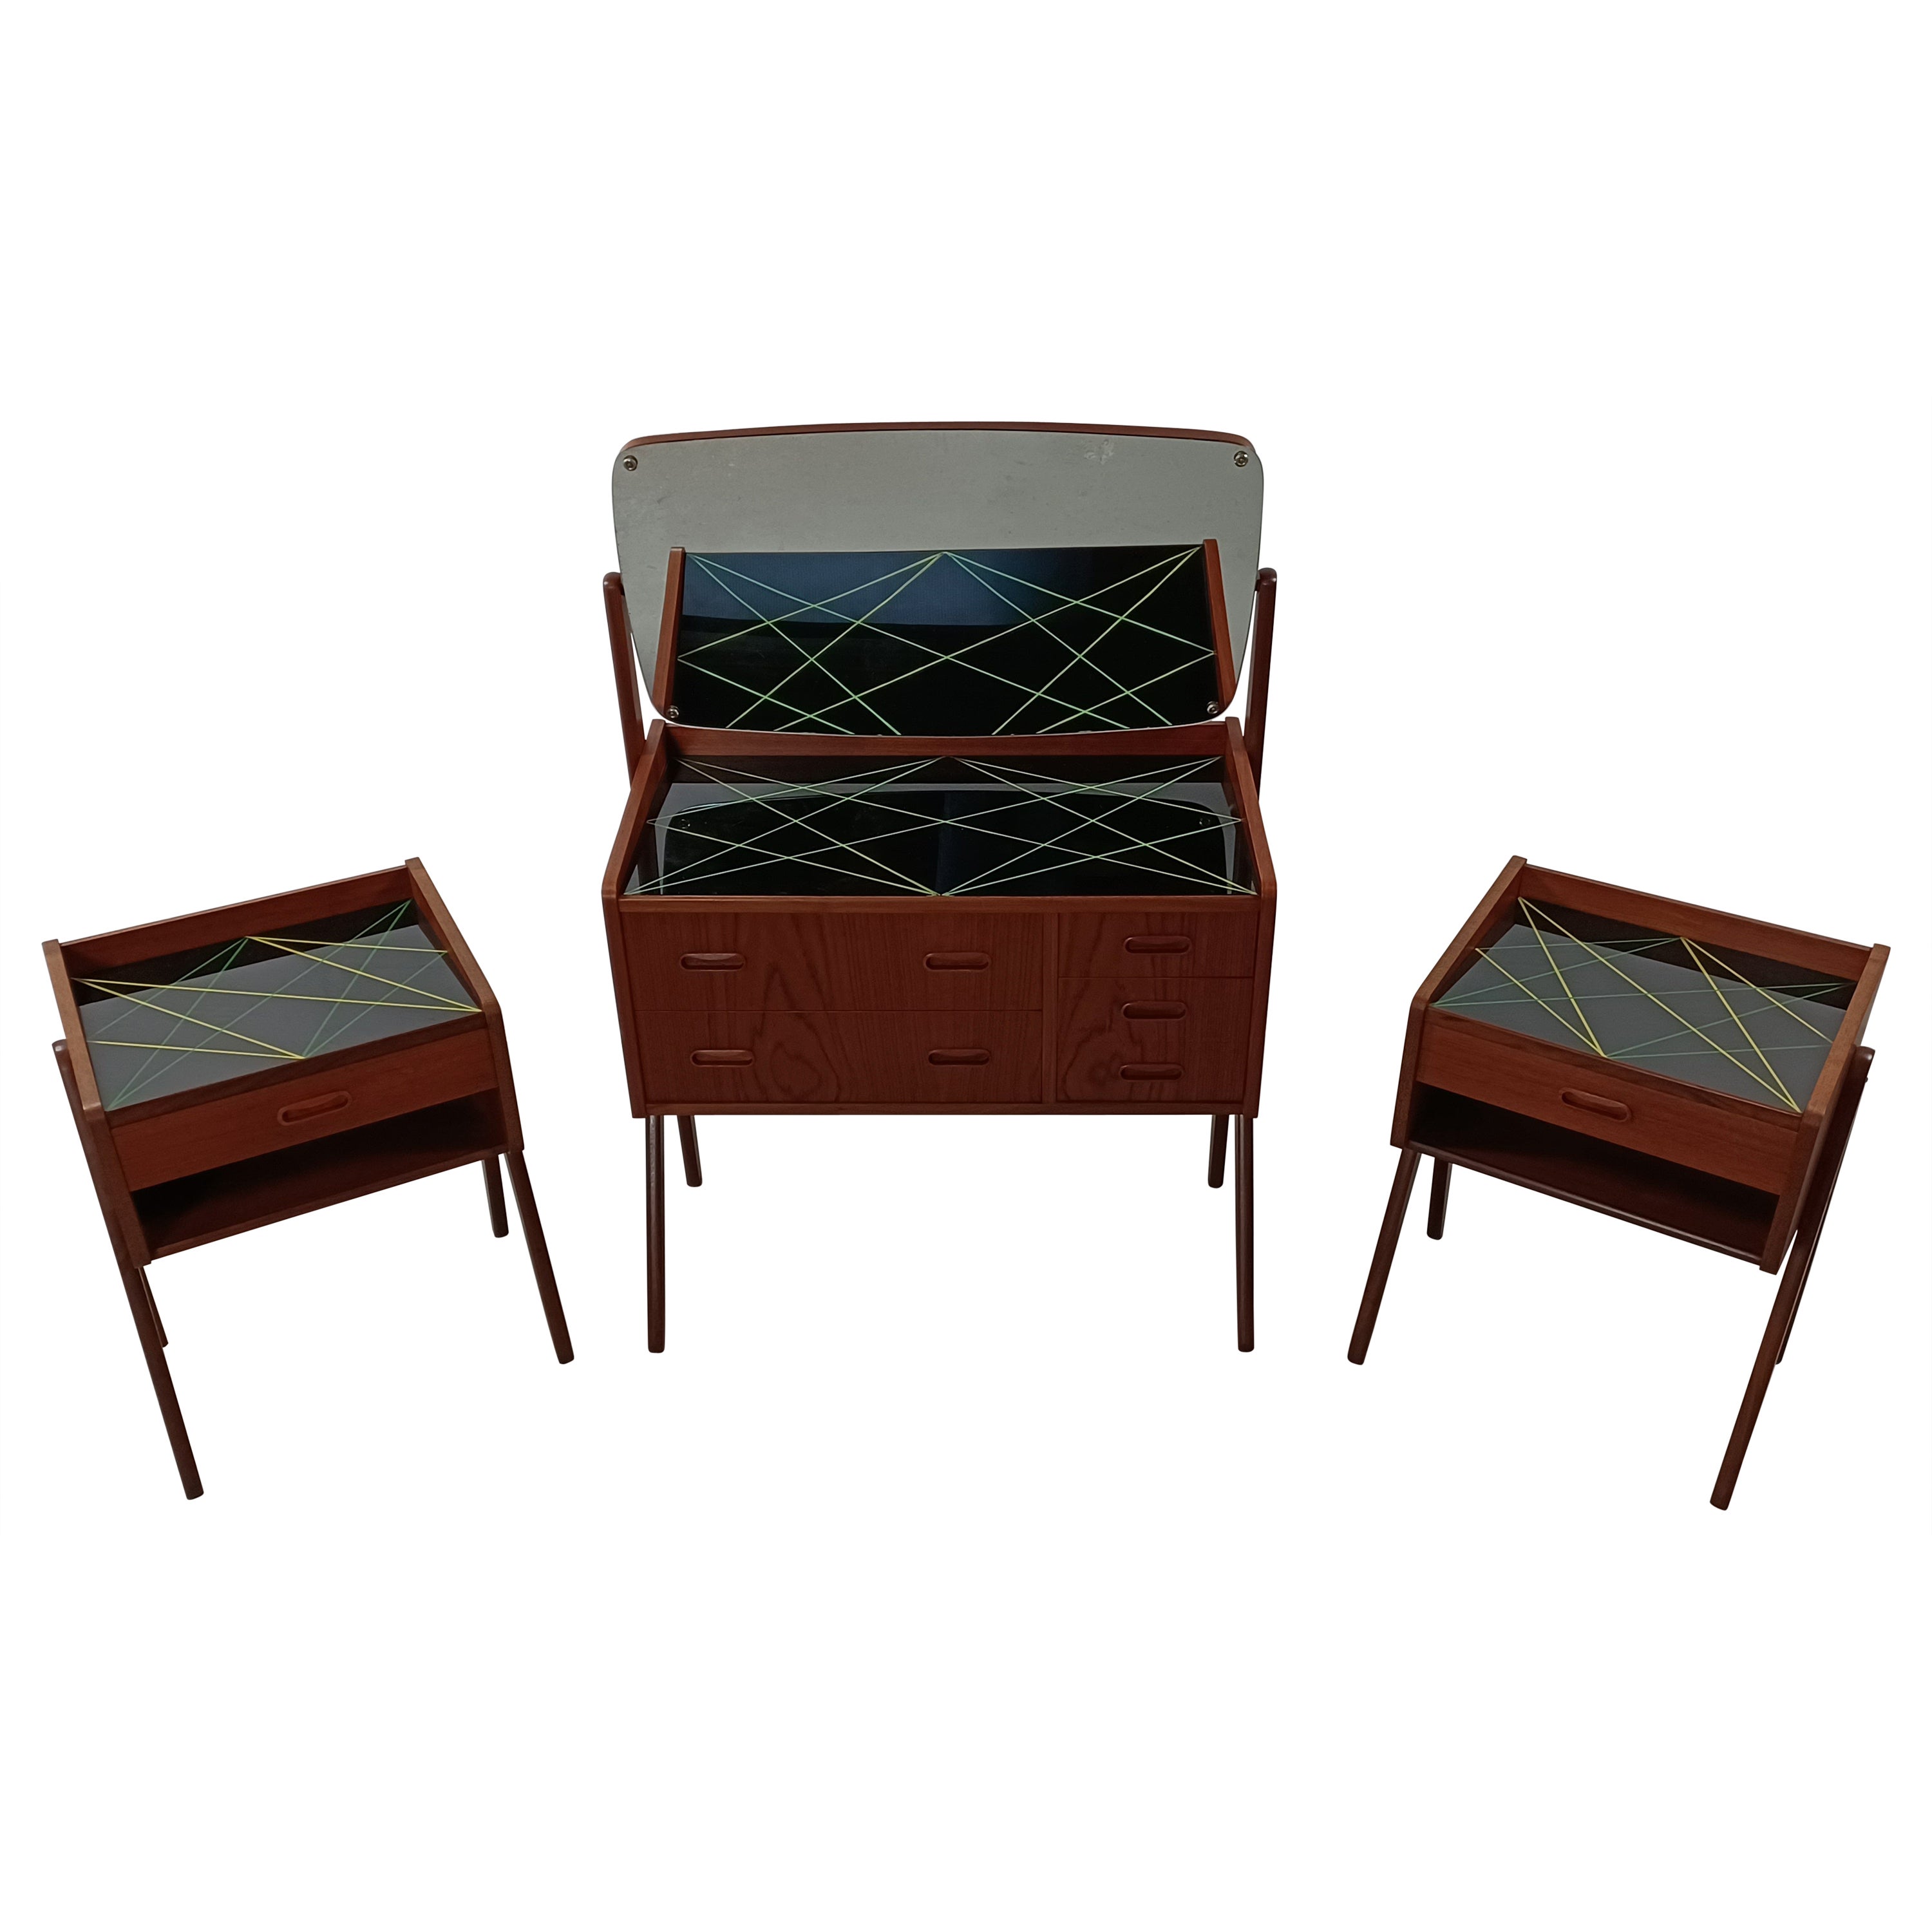 1960s Teak Vanity Table and Two Nightstands with Decorated Glass Tabletops For Sale